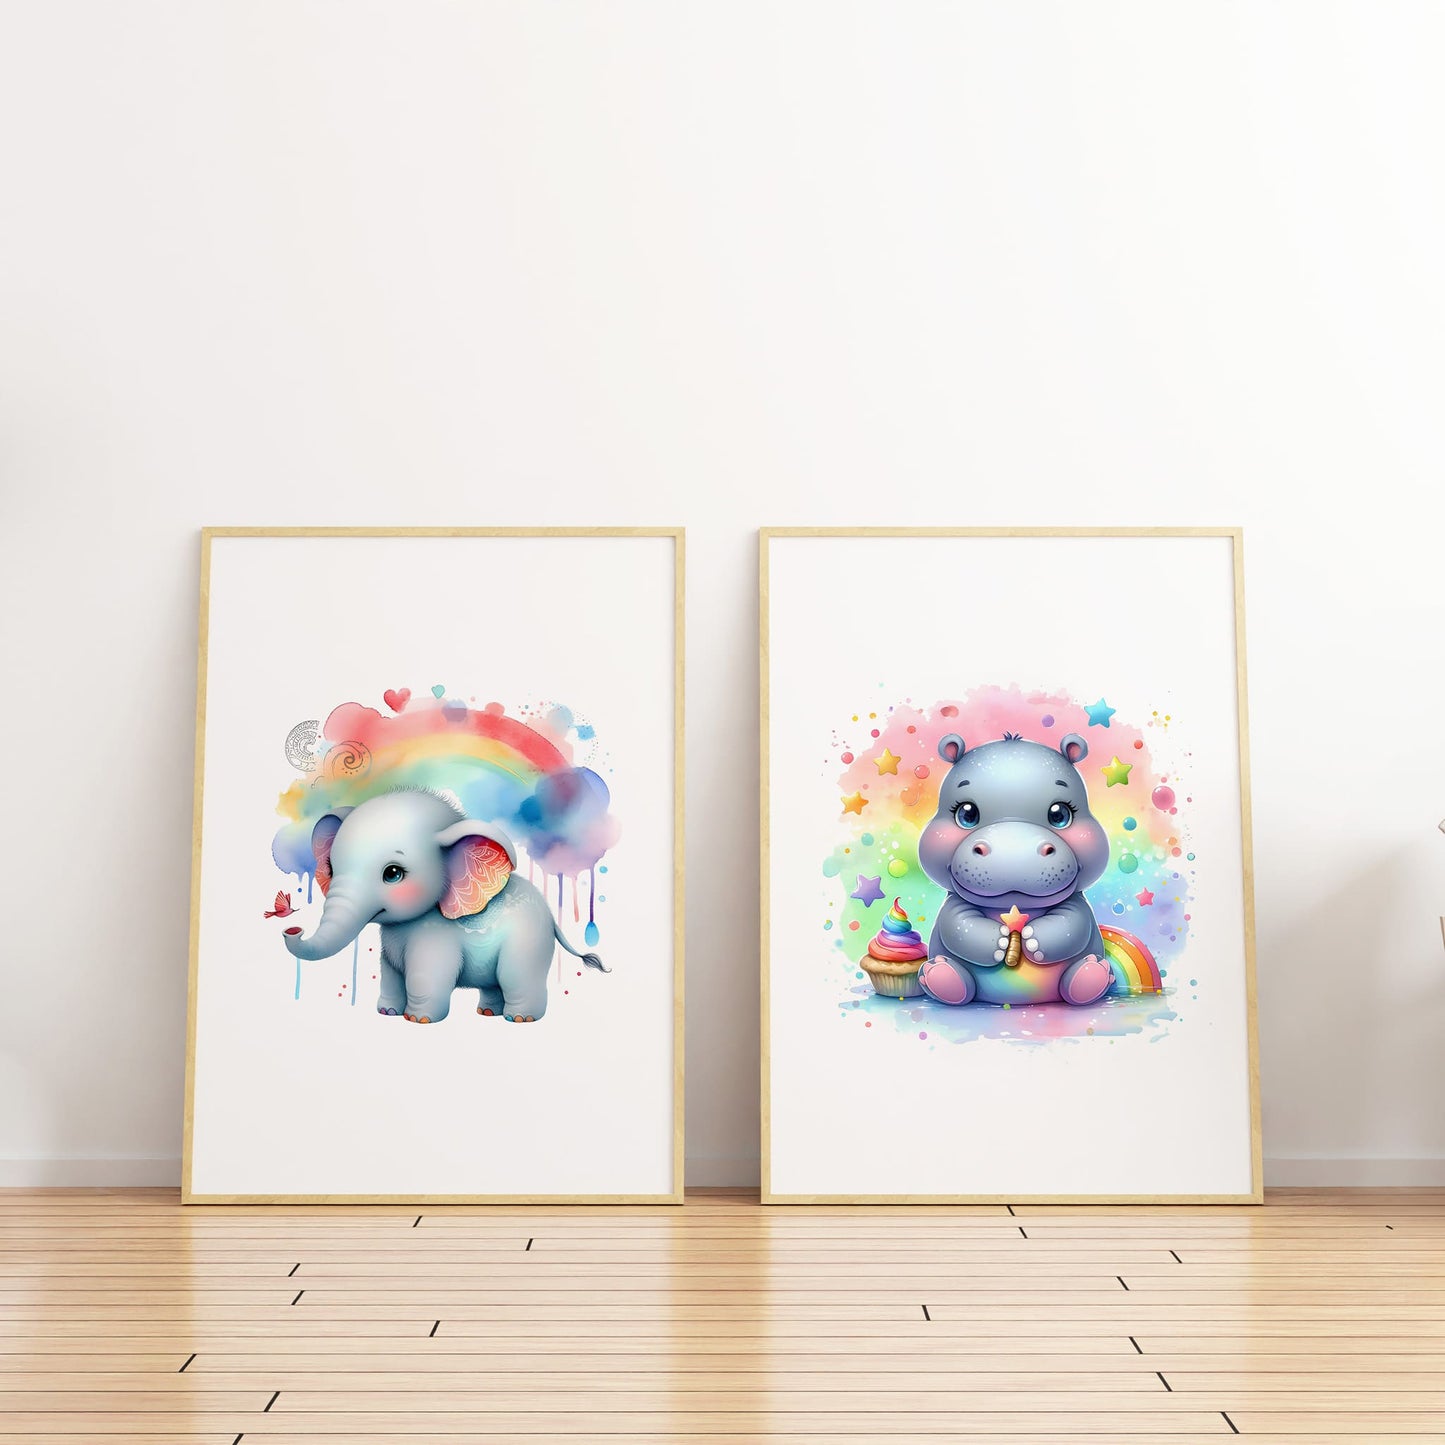 Set of two A4 prints featuring cute cartoon watercolour style elephant and hippo. Behind the animals are bright rainbow effect. Adorned with small hearts and stars. The prints are bright and colourful, adding a vibrant touch to any space.